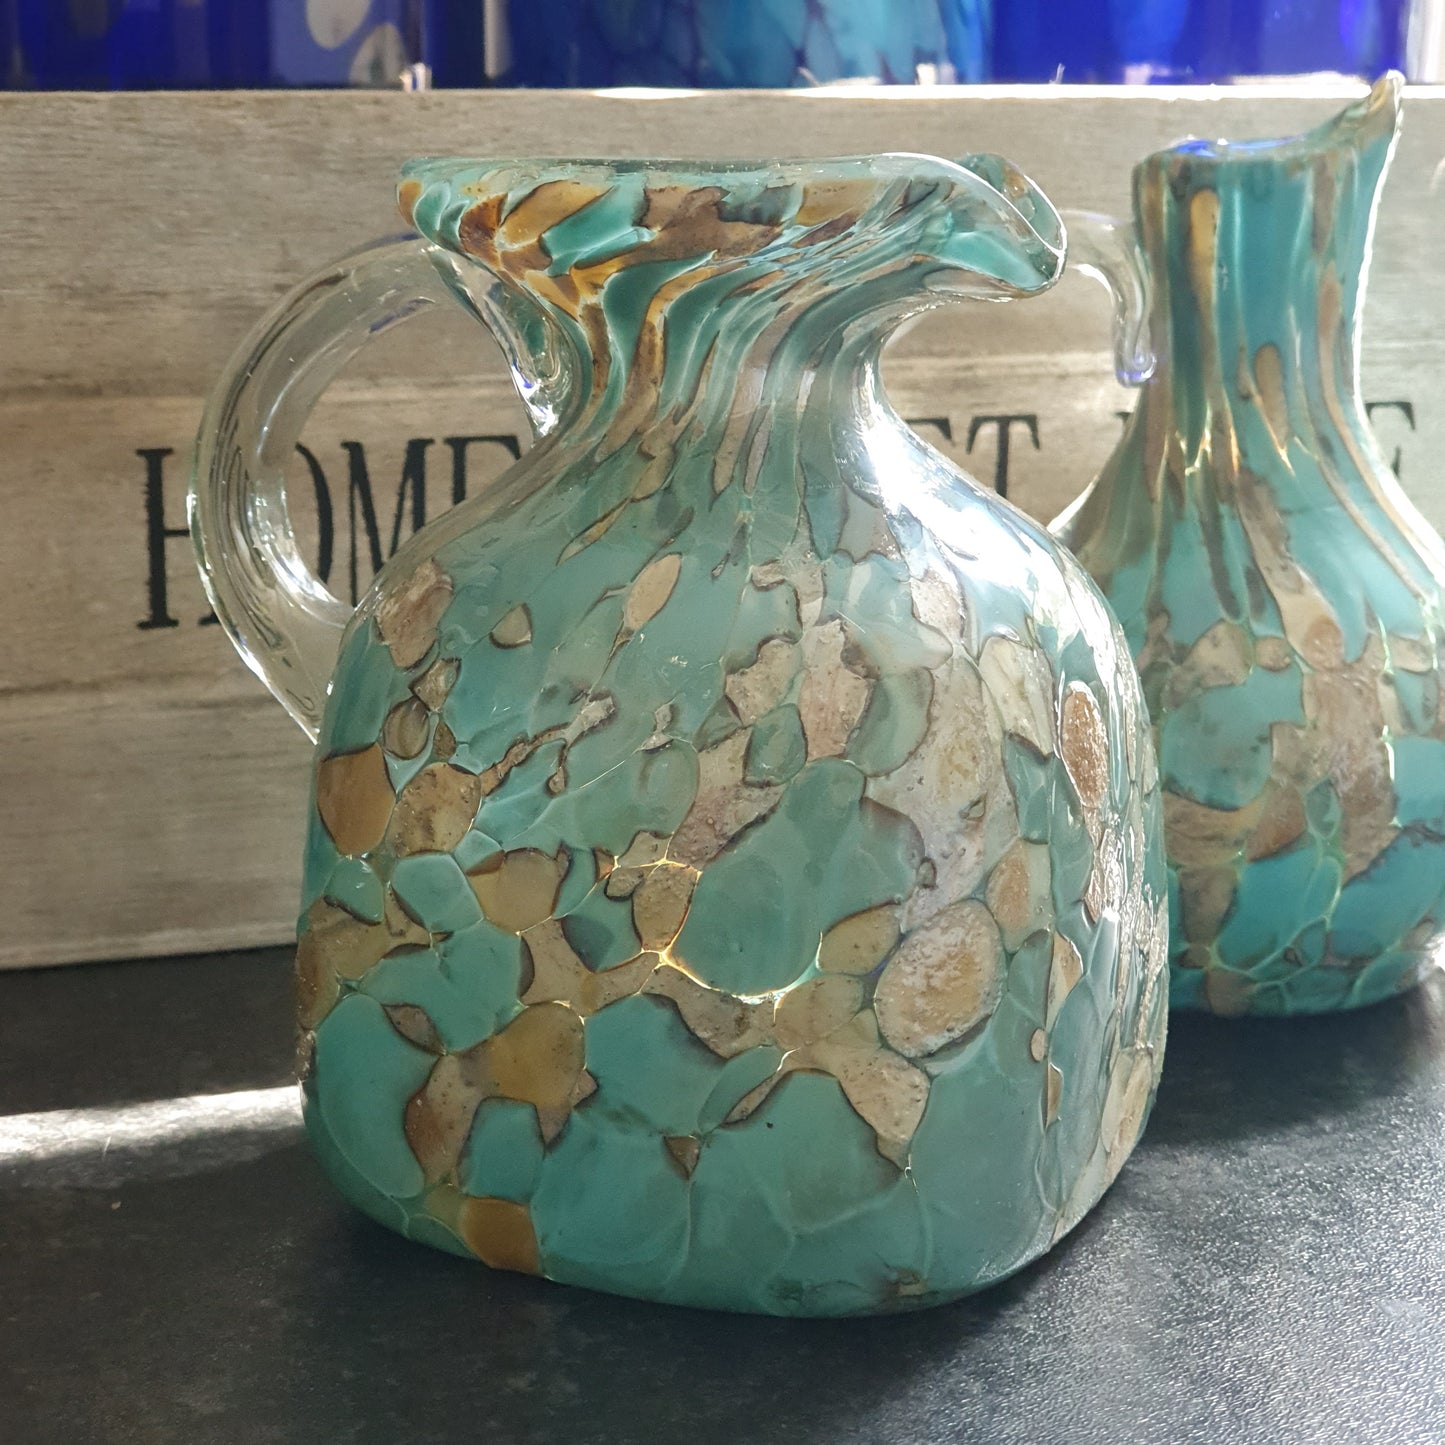 Sirena Turquoise Edition Set of 2 Jugs - Mexican, Turquoise & Marble | Creamer Jugs | Oil Vinegar Jugs